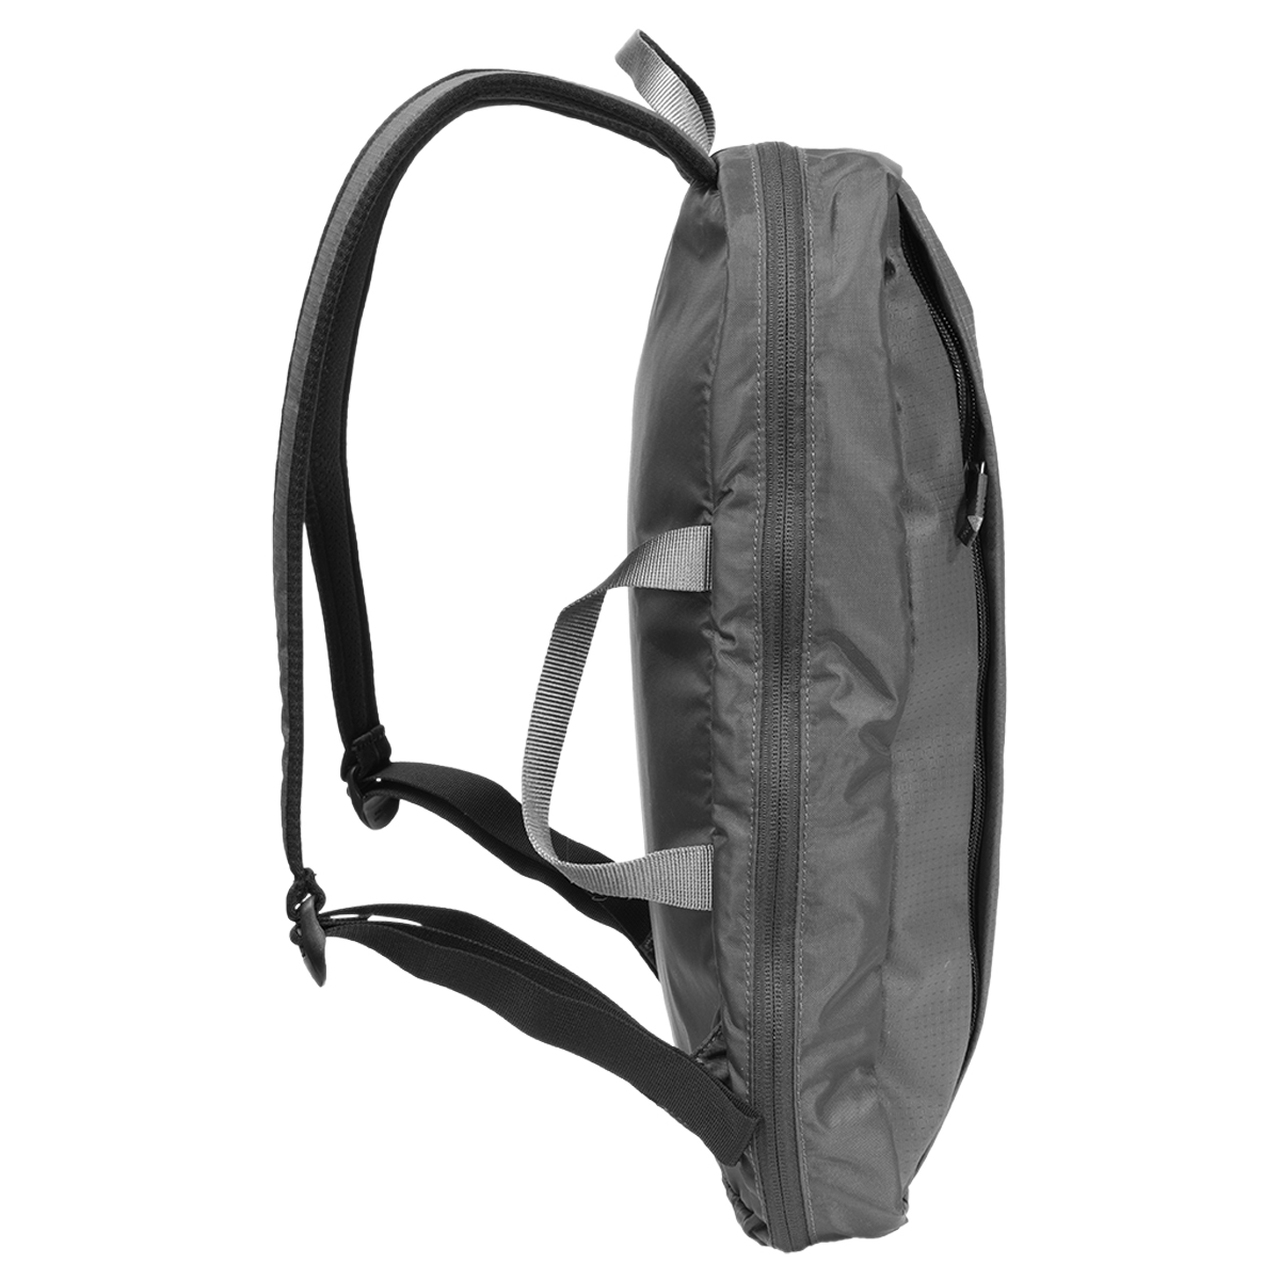 Surrept/12 CS Reversible Carry System - Charcoal + Bright Grey